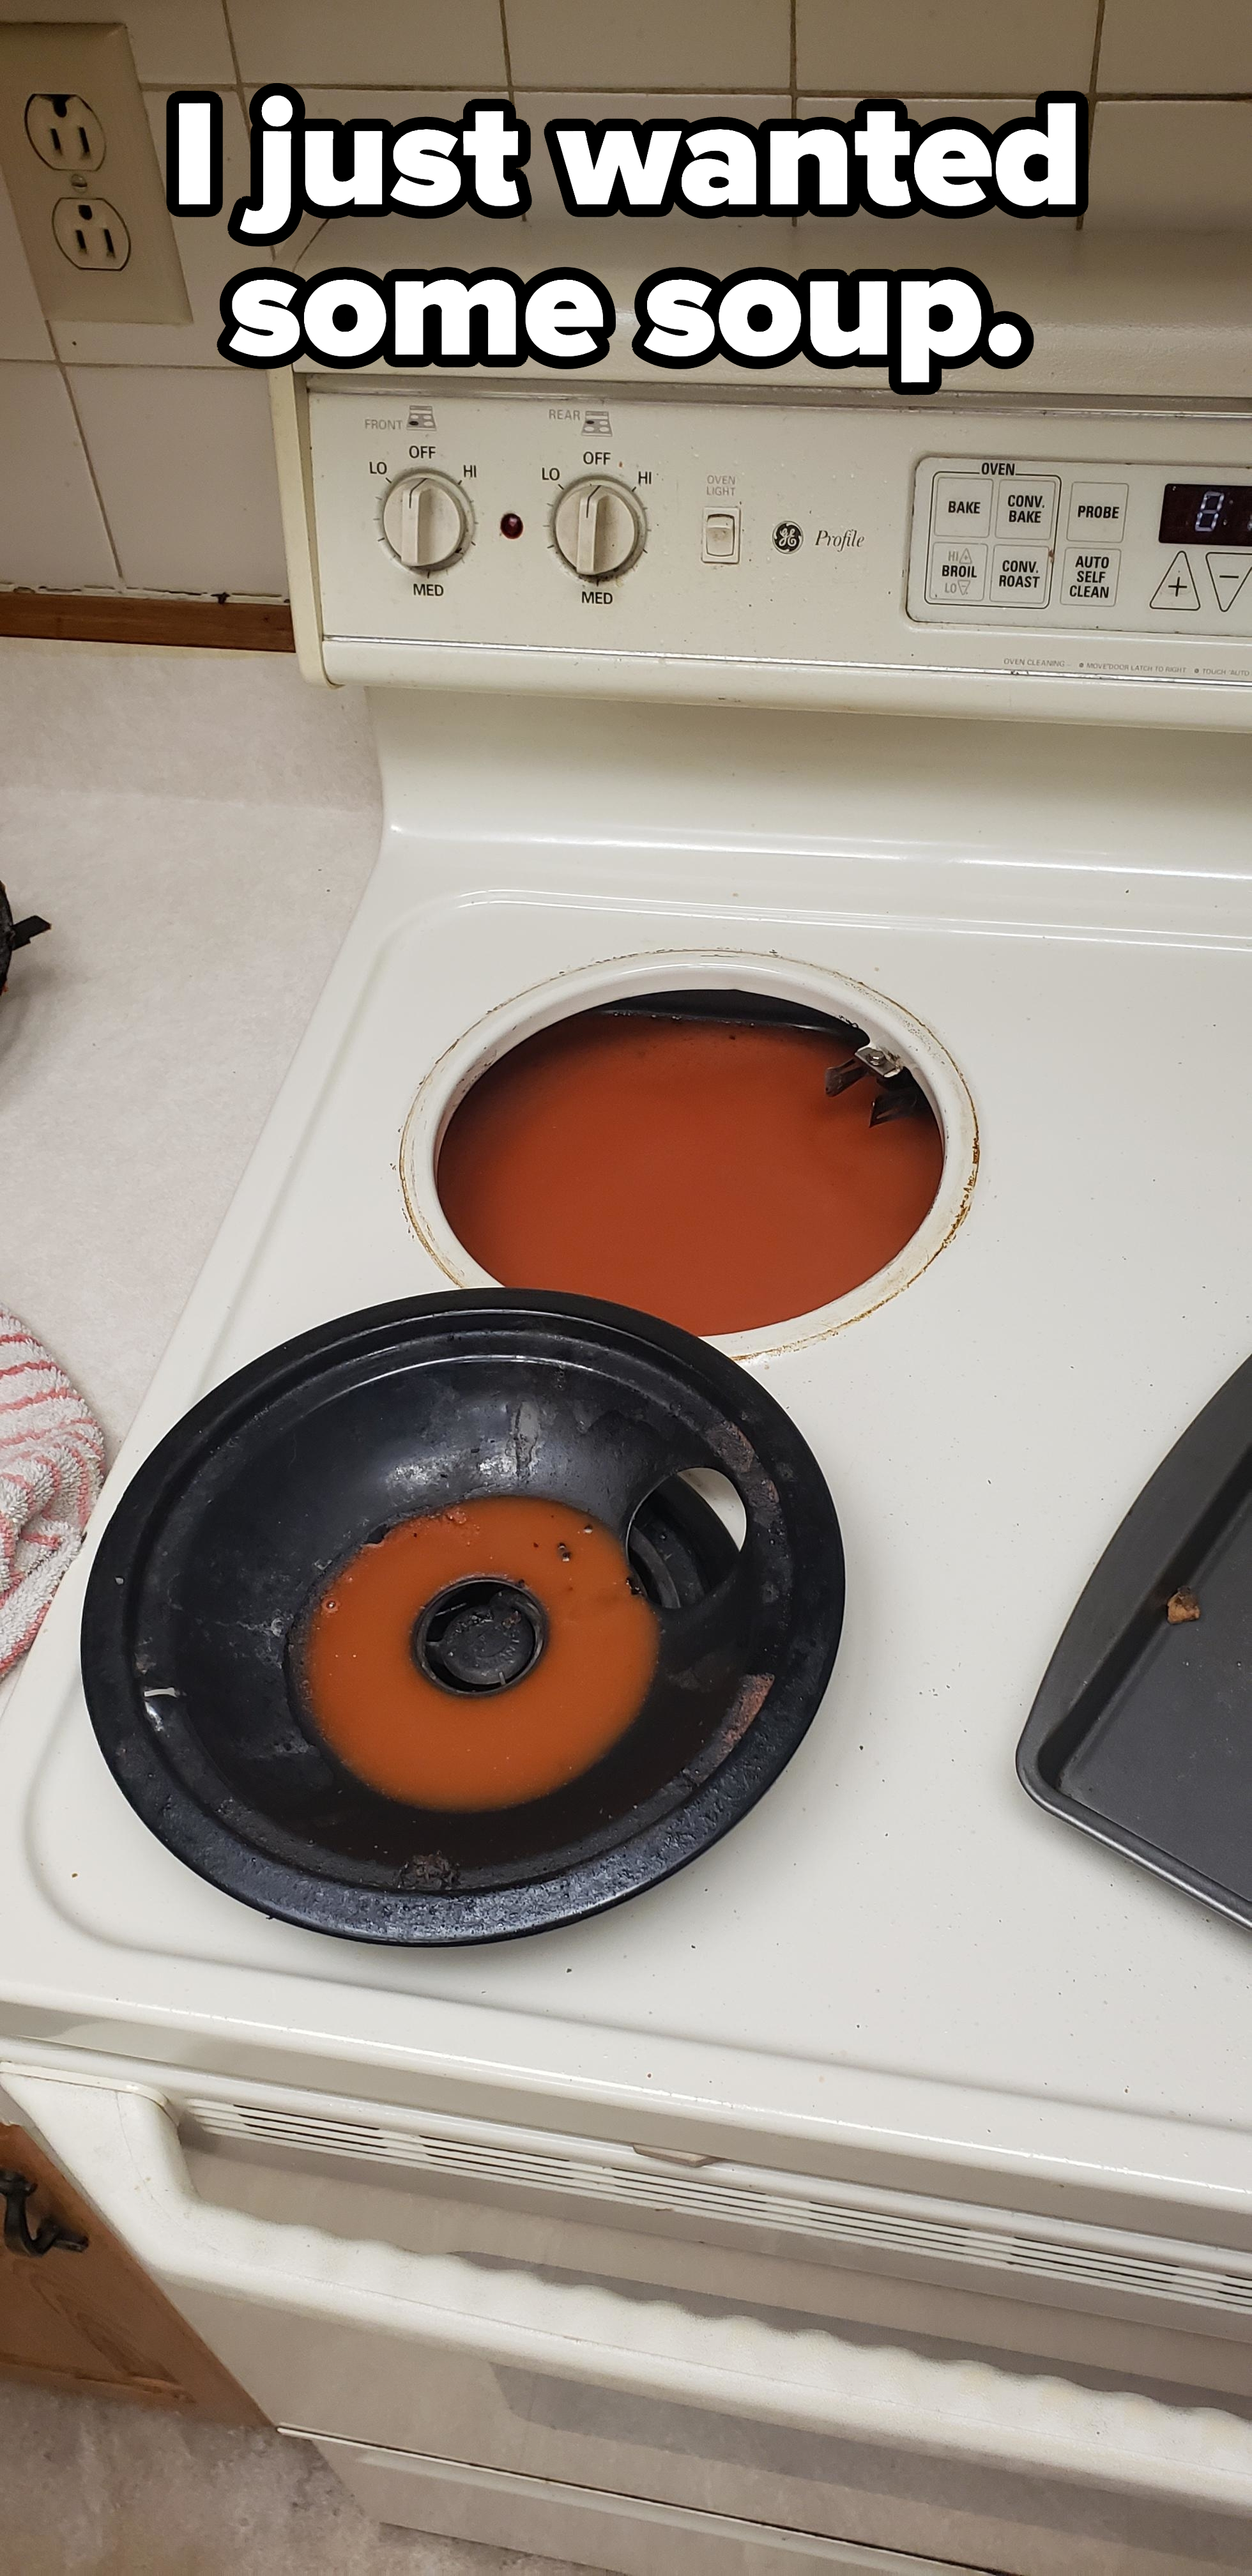 Soup that&#x27;s spilled all over and into a stove top burner with caption &quot;I just wanted some soup&quot;